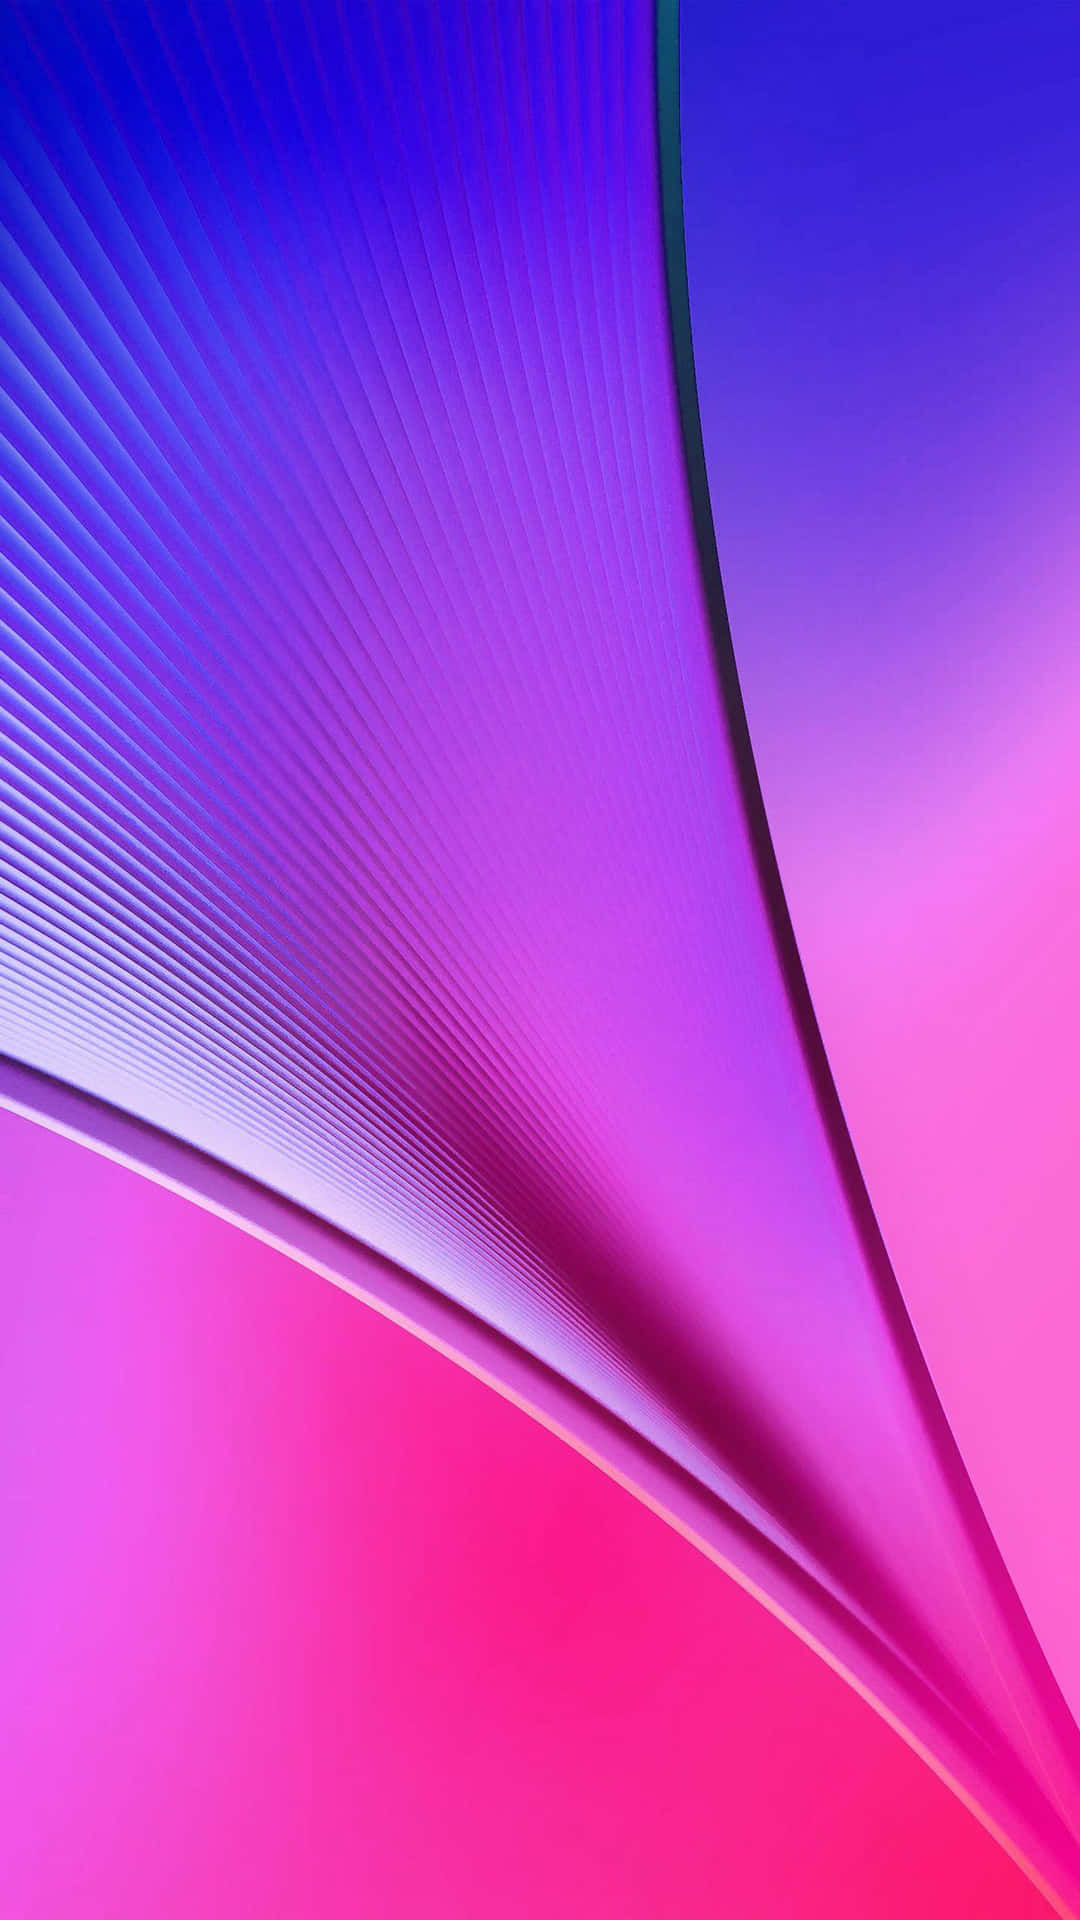 Colorful abstract background in pink and blue